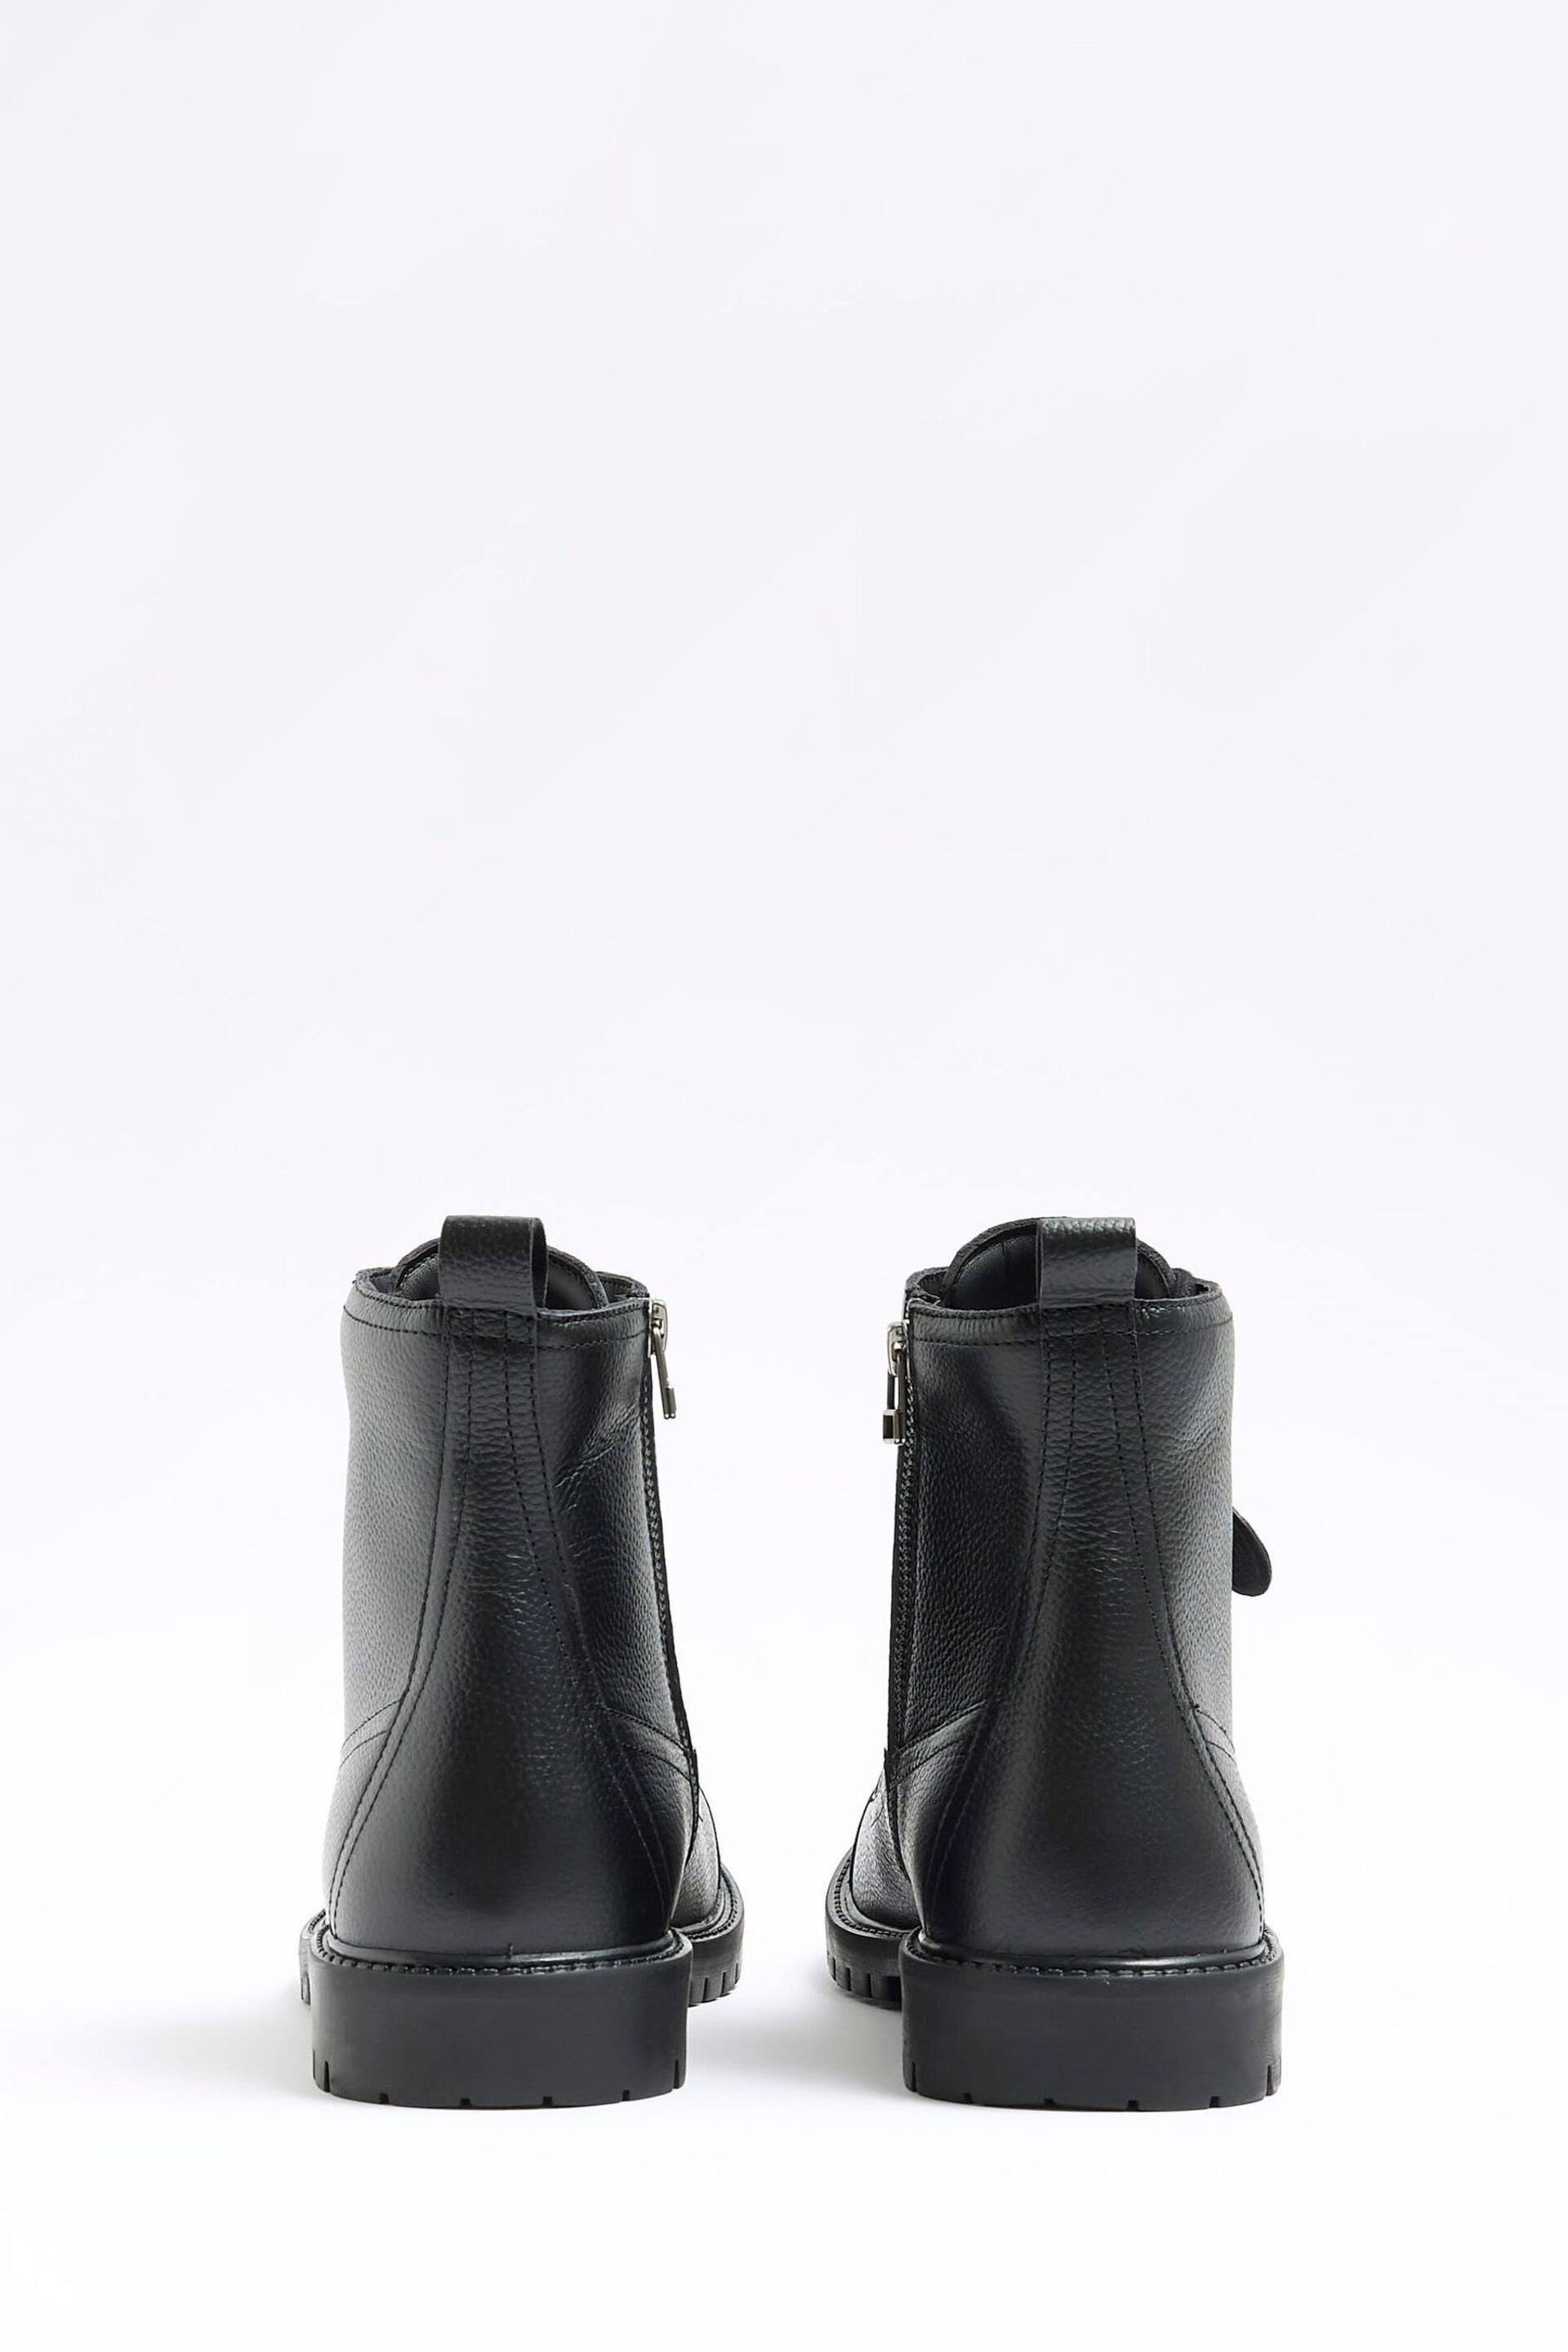 River Island Black Leather Leather Laced Combat Boots - Image 3 of 5